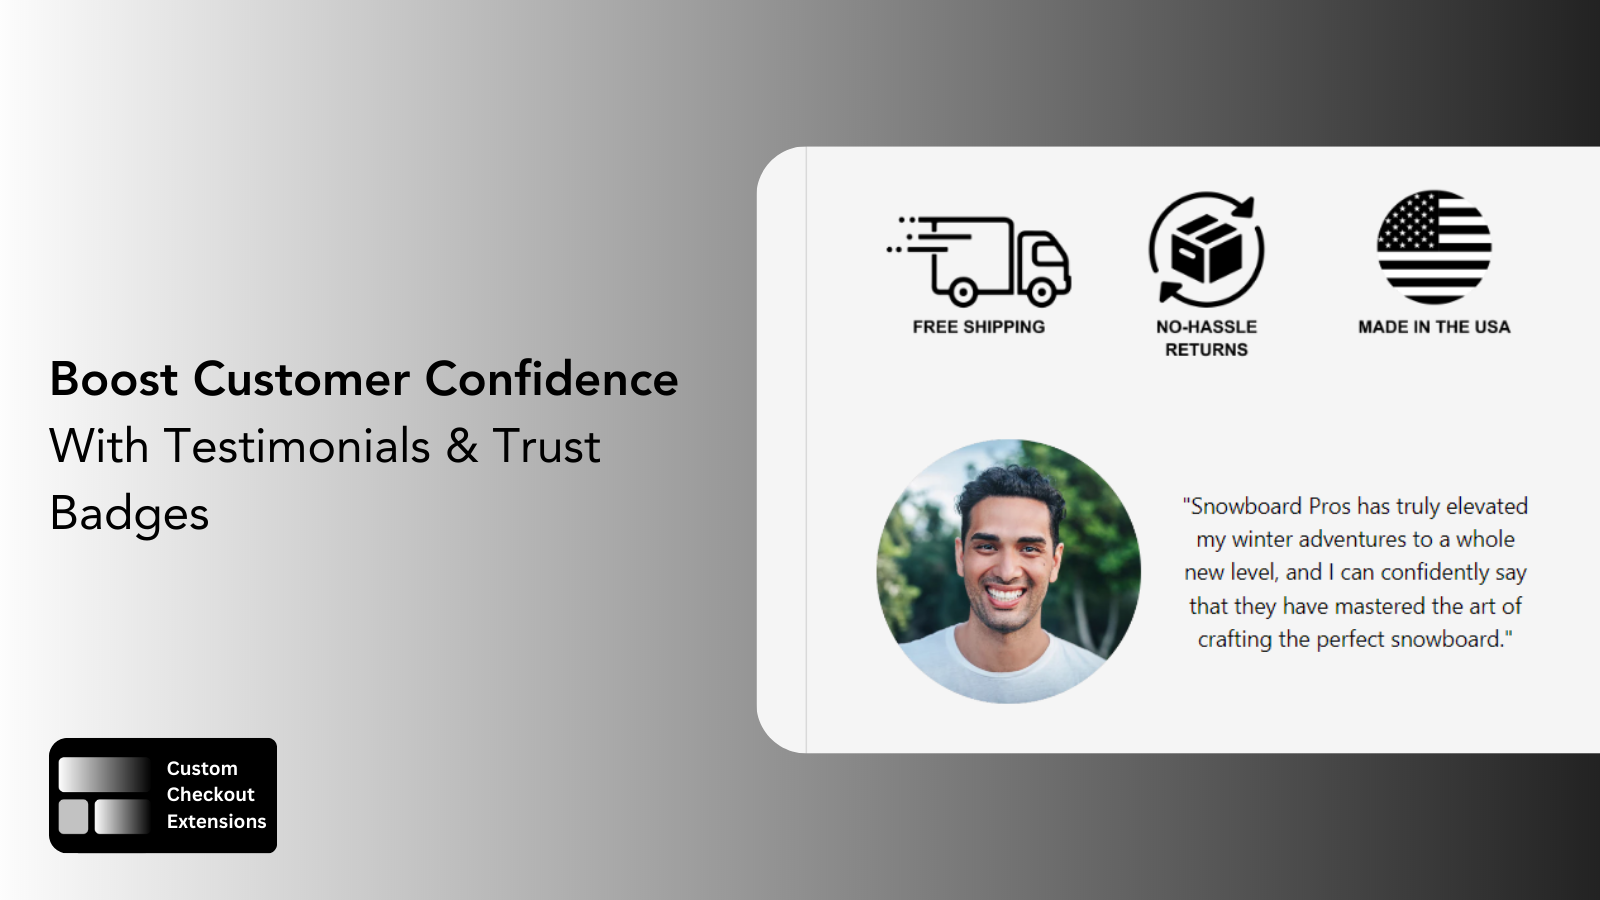 Boost customer confidence with testimonials & trust badges